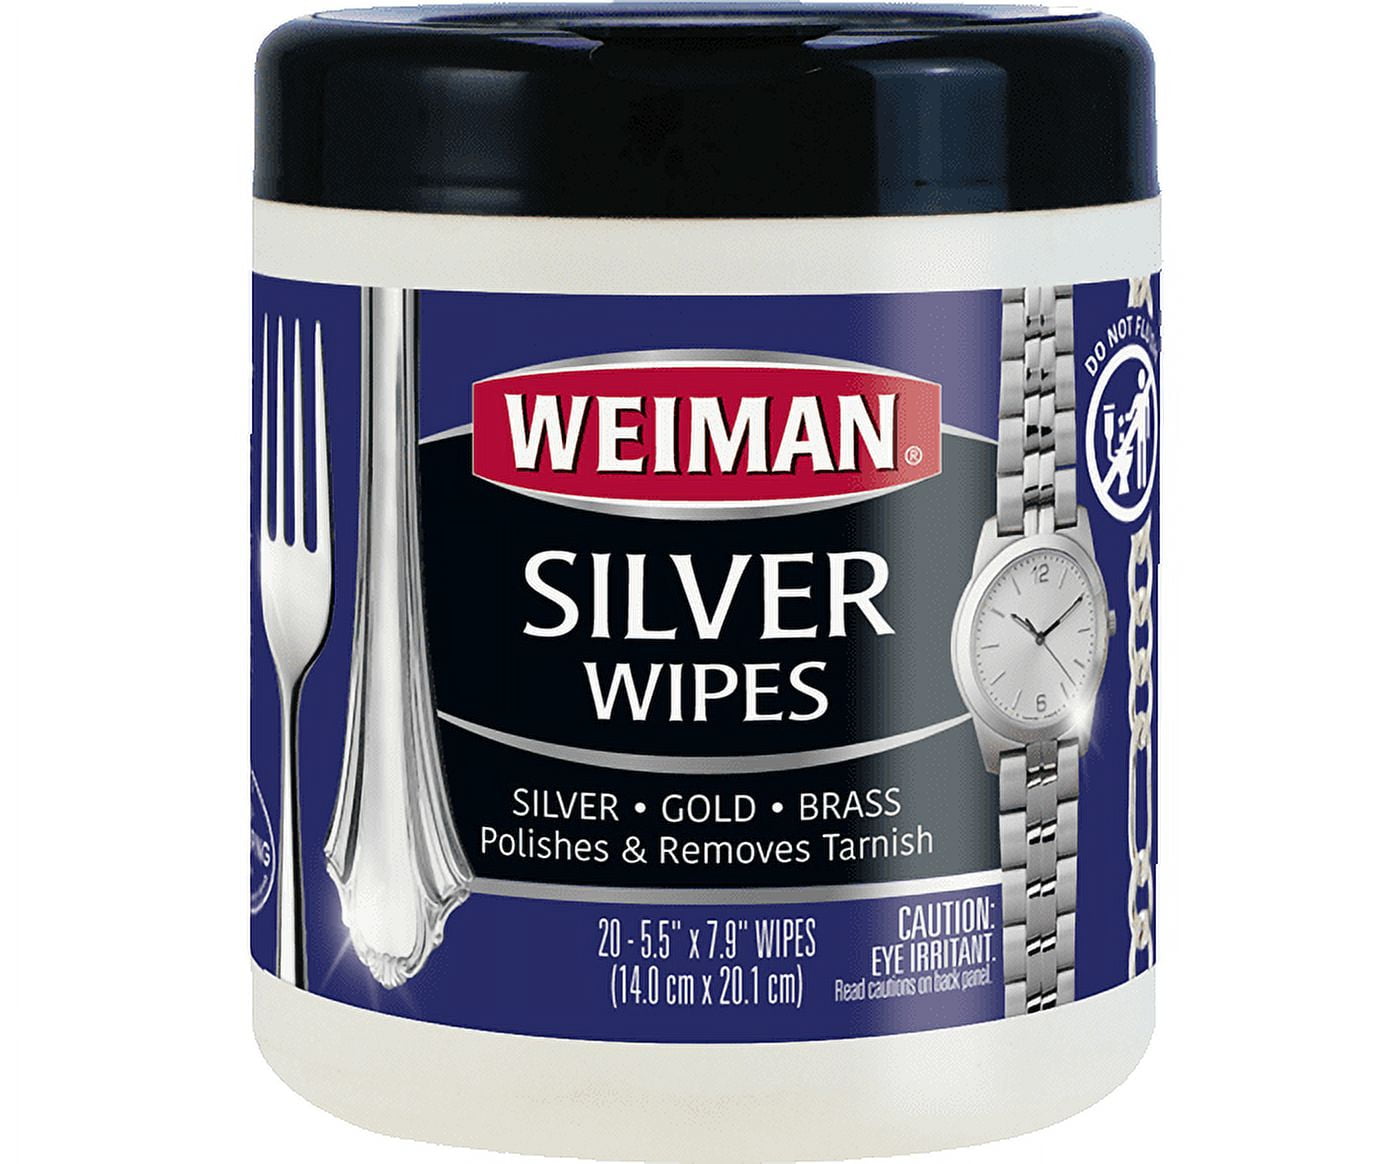 Weiman Jewelry Polish Cleaner and Tarnish Remover Wipes - 20 Count